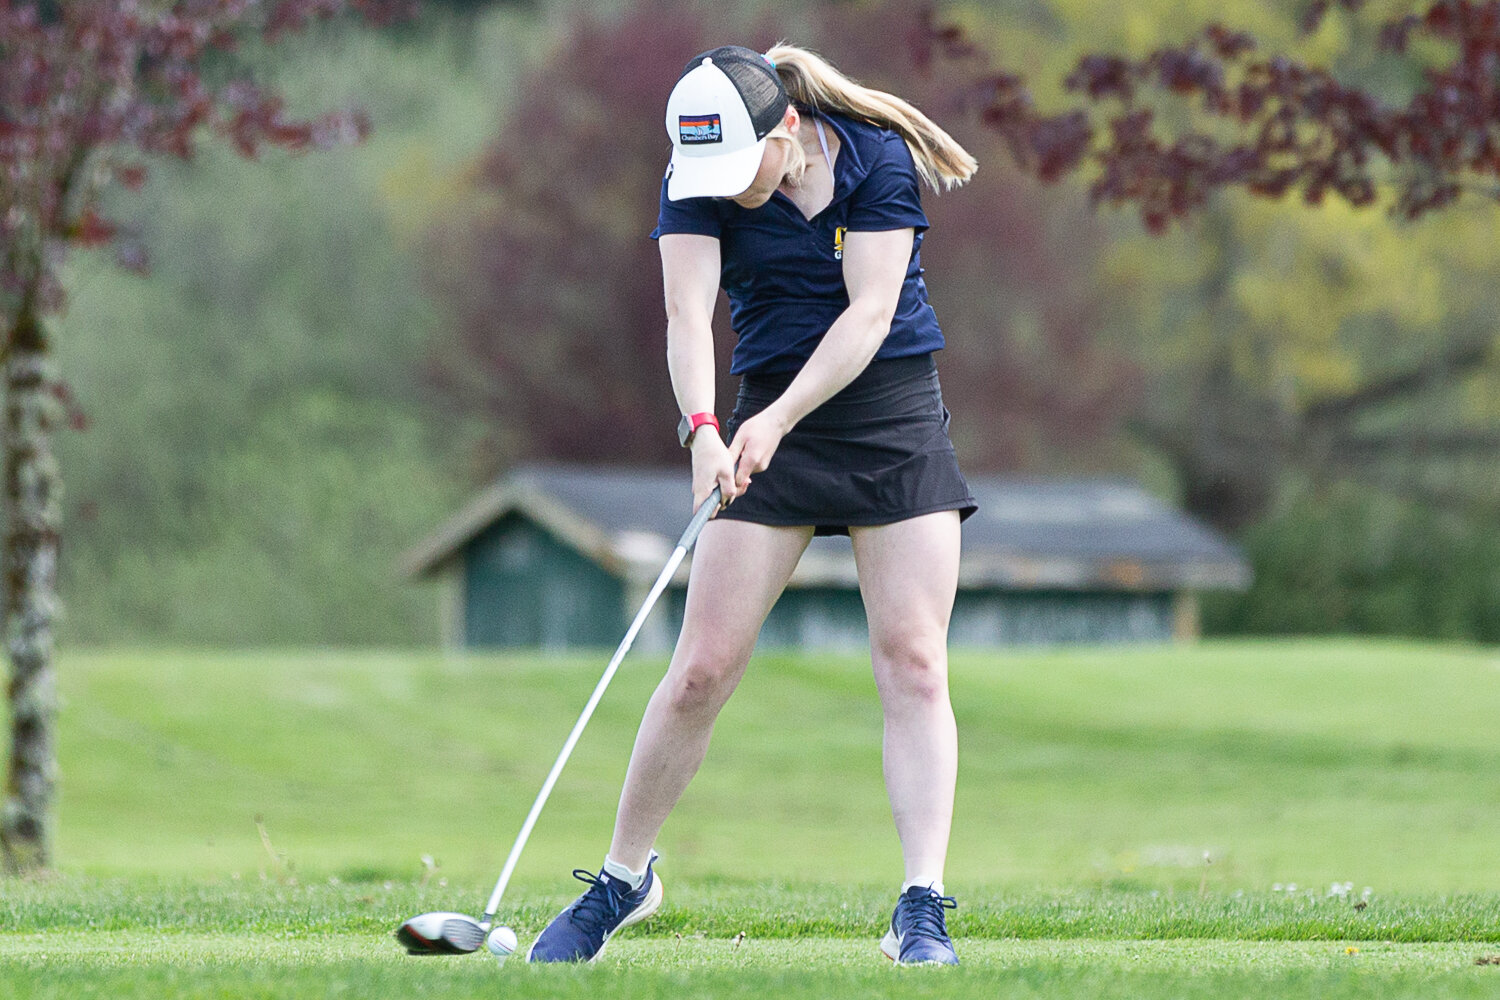 Aberdeen's Britt Rajcich tees off at Tumwater Valley Golf Course of the 2A EvCo Championships May 9.